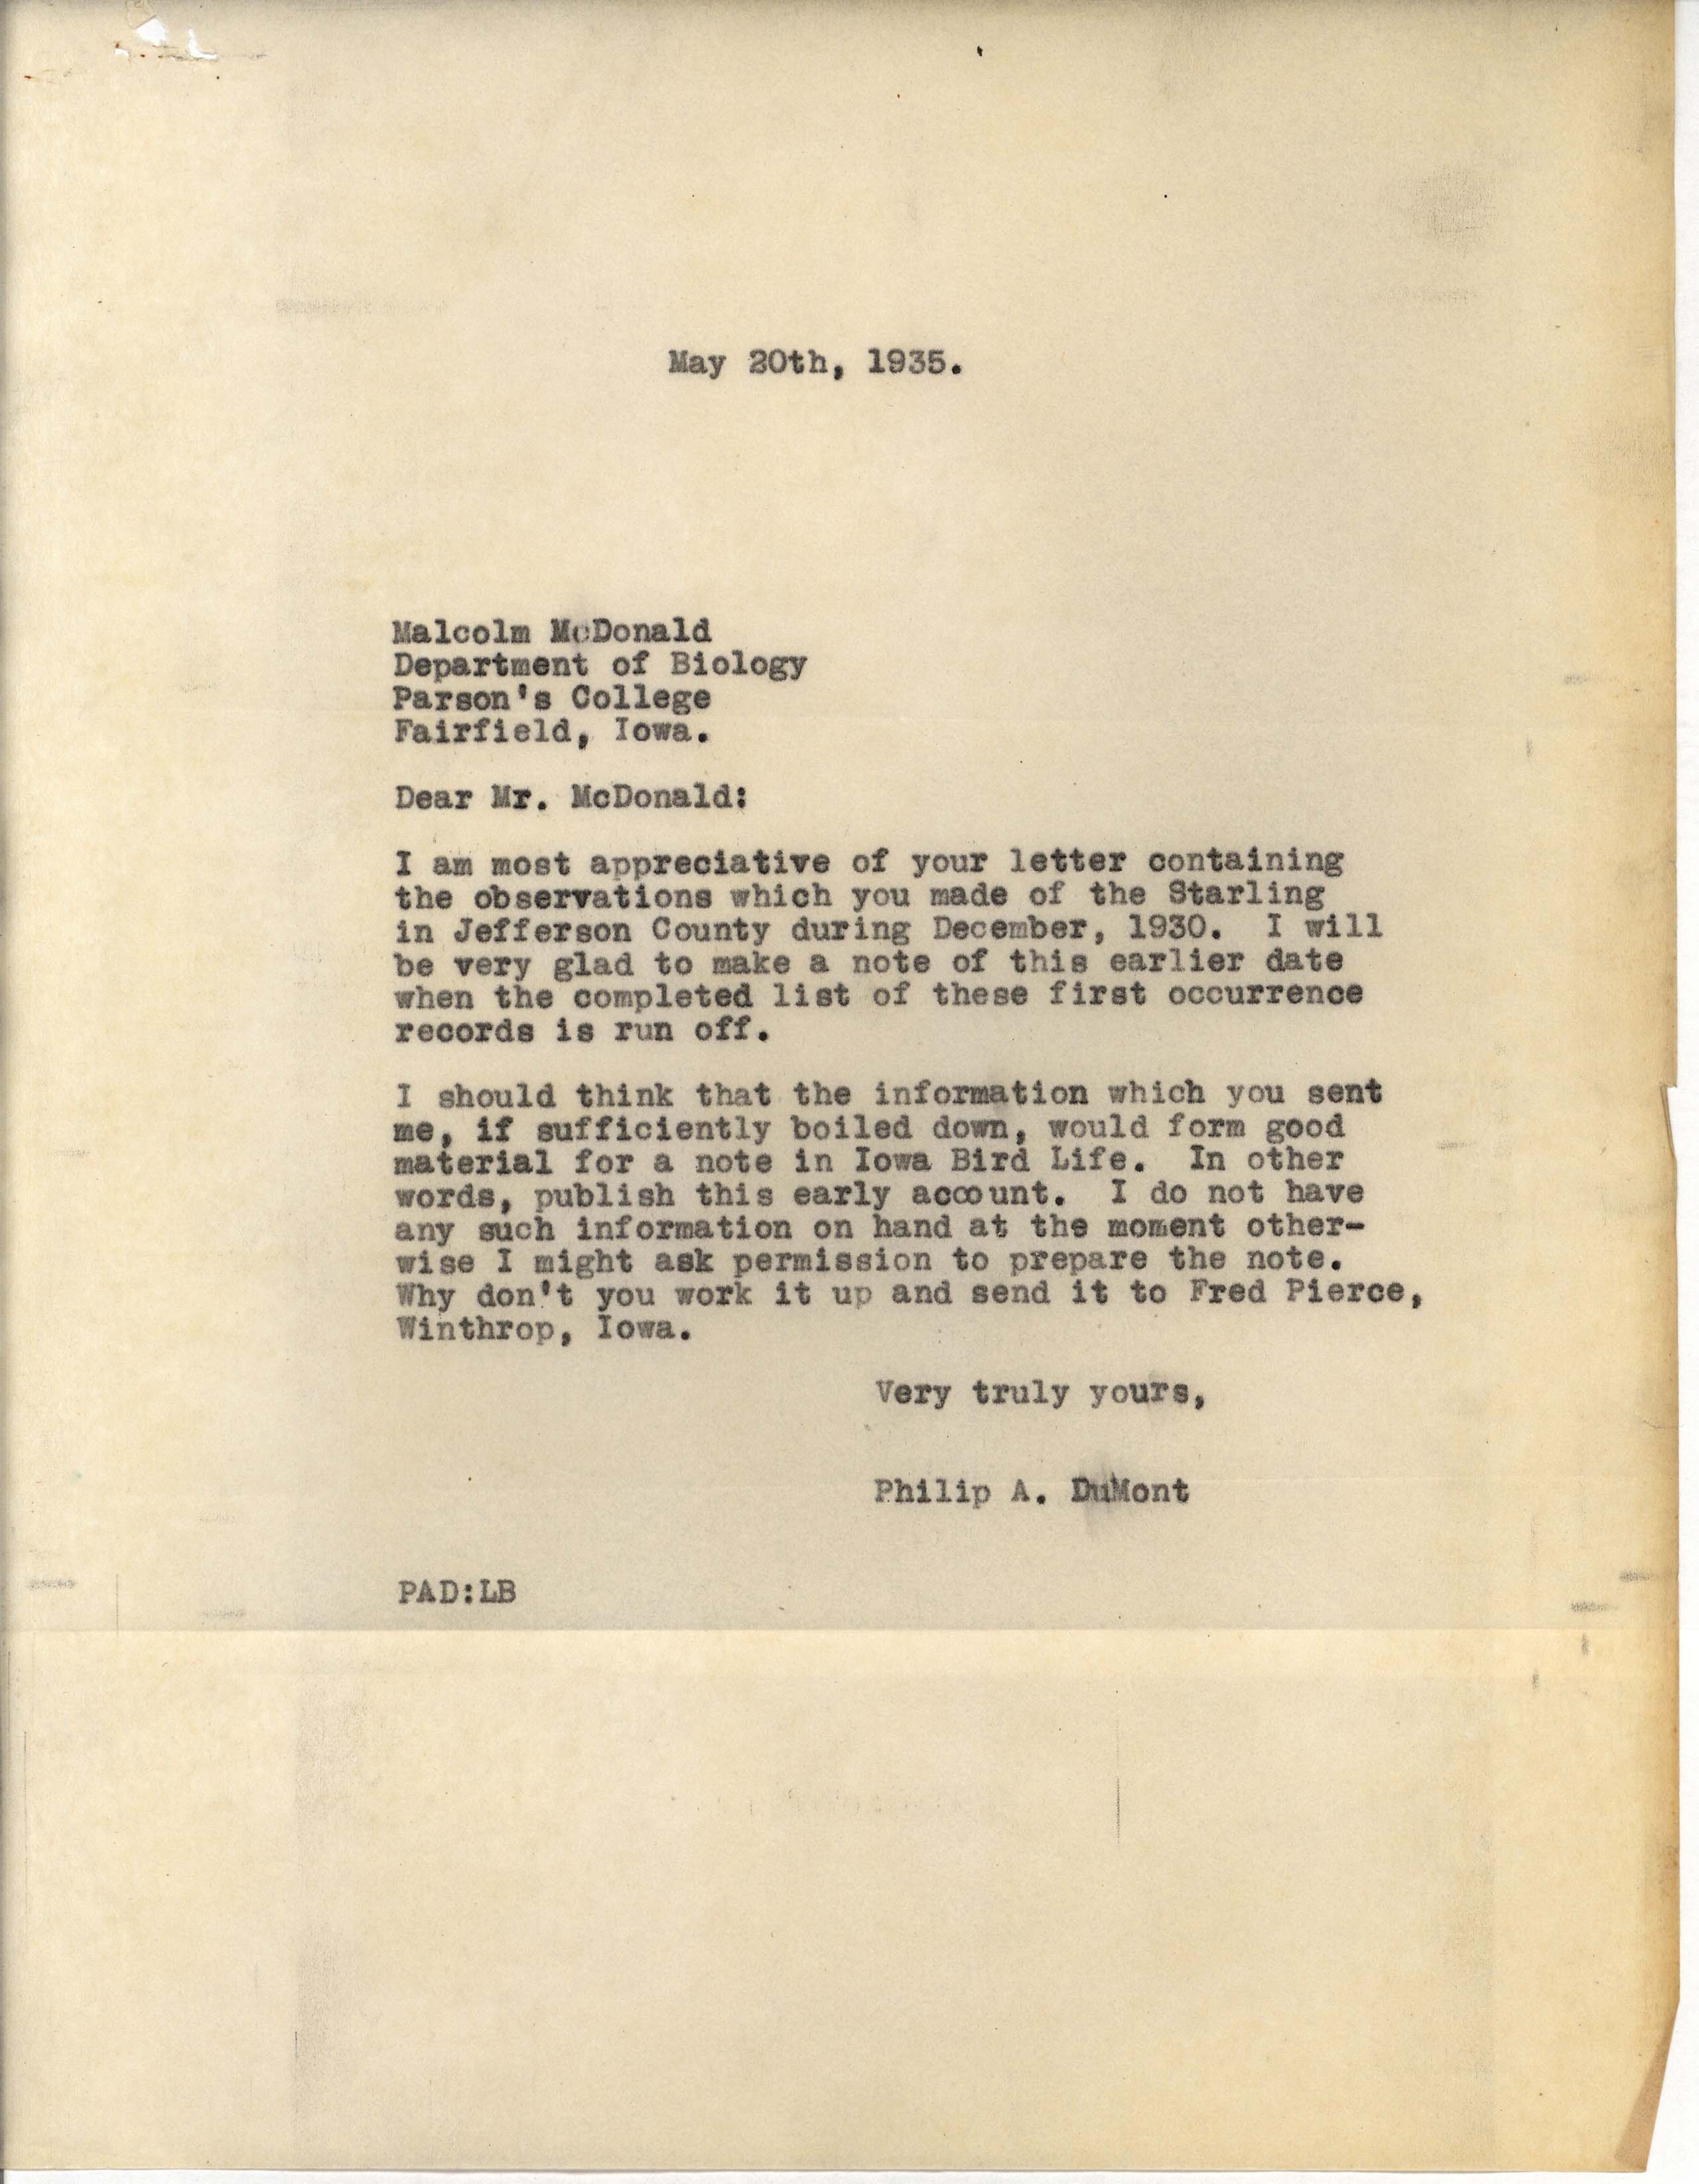 Philip DuMont letter to Malcolm McDonald regarding Starling account, May 20, 1935